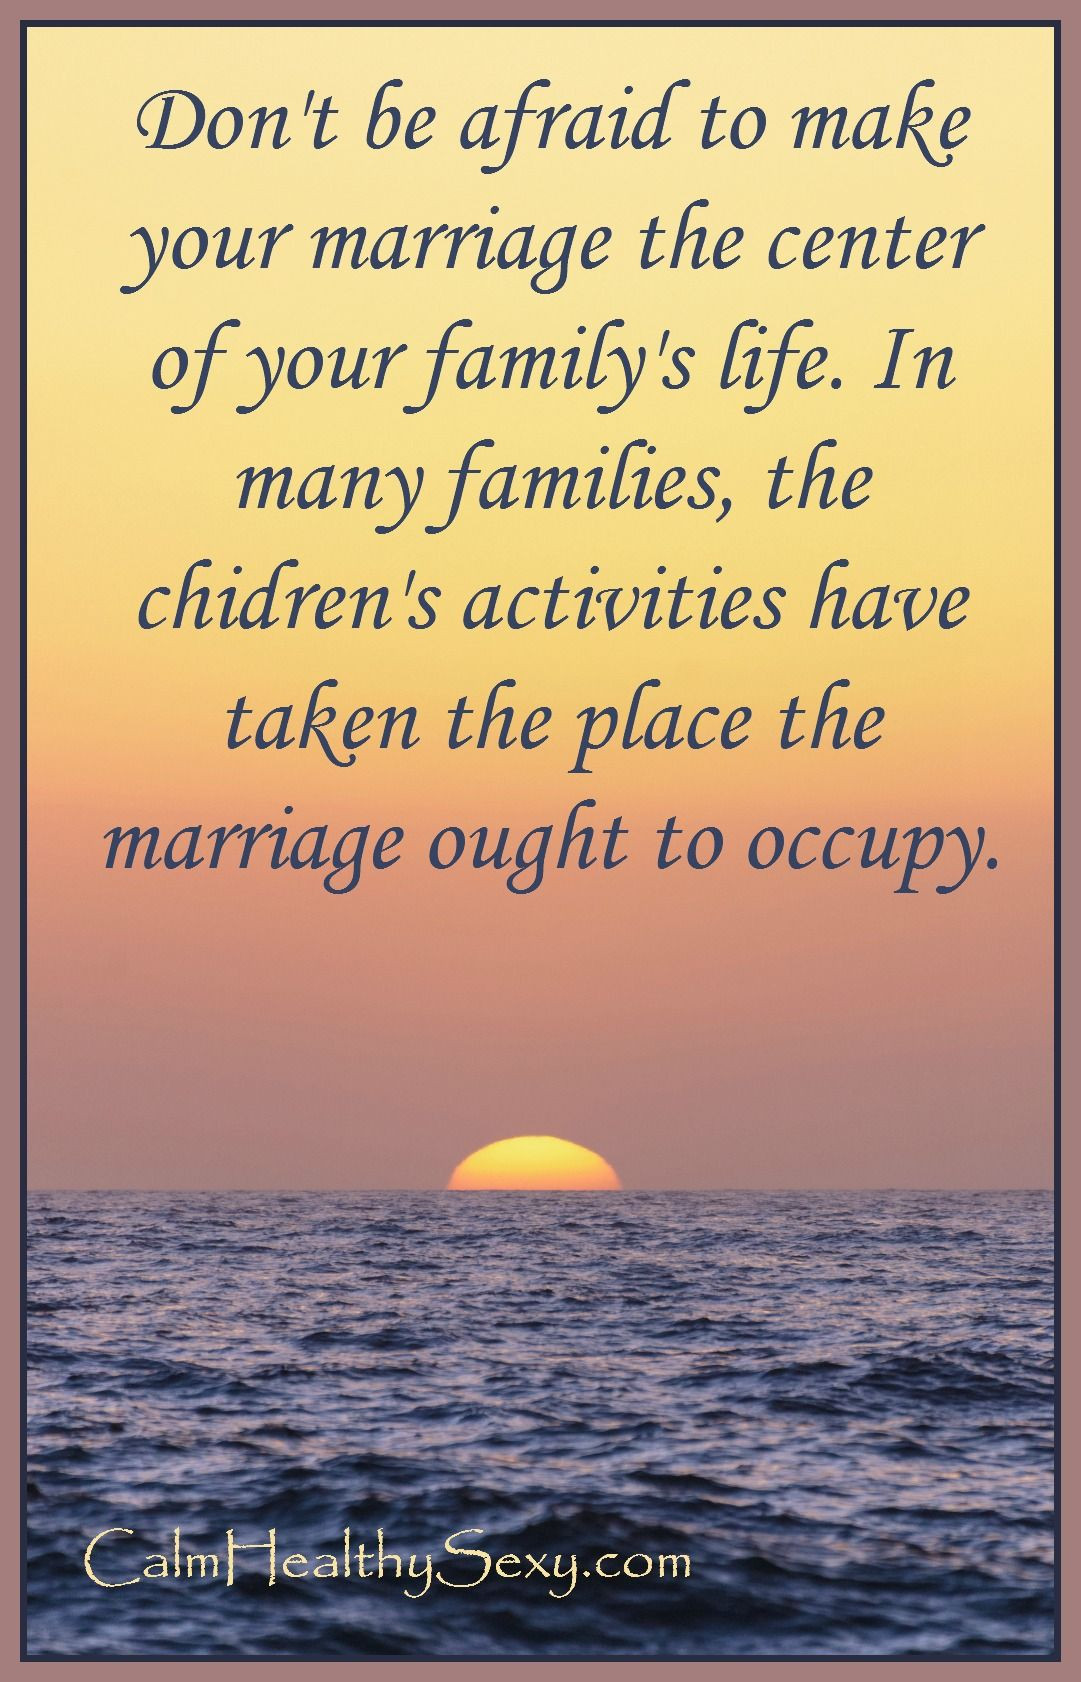 Marriage Problems Quotes Inspirational
 17 Inspirational Marriage Quotes and Love Quotes Free